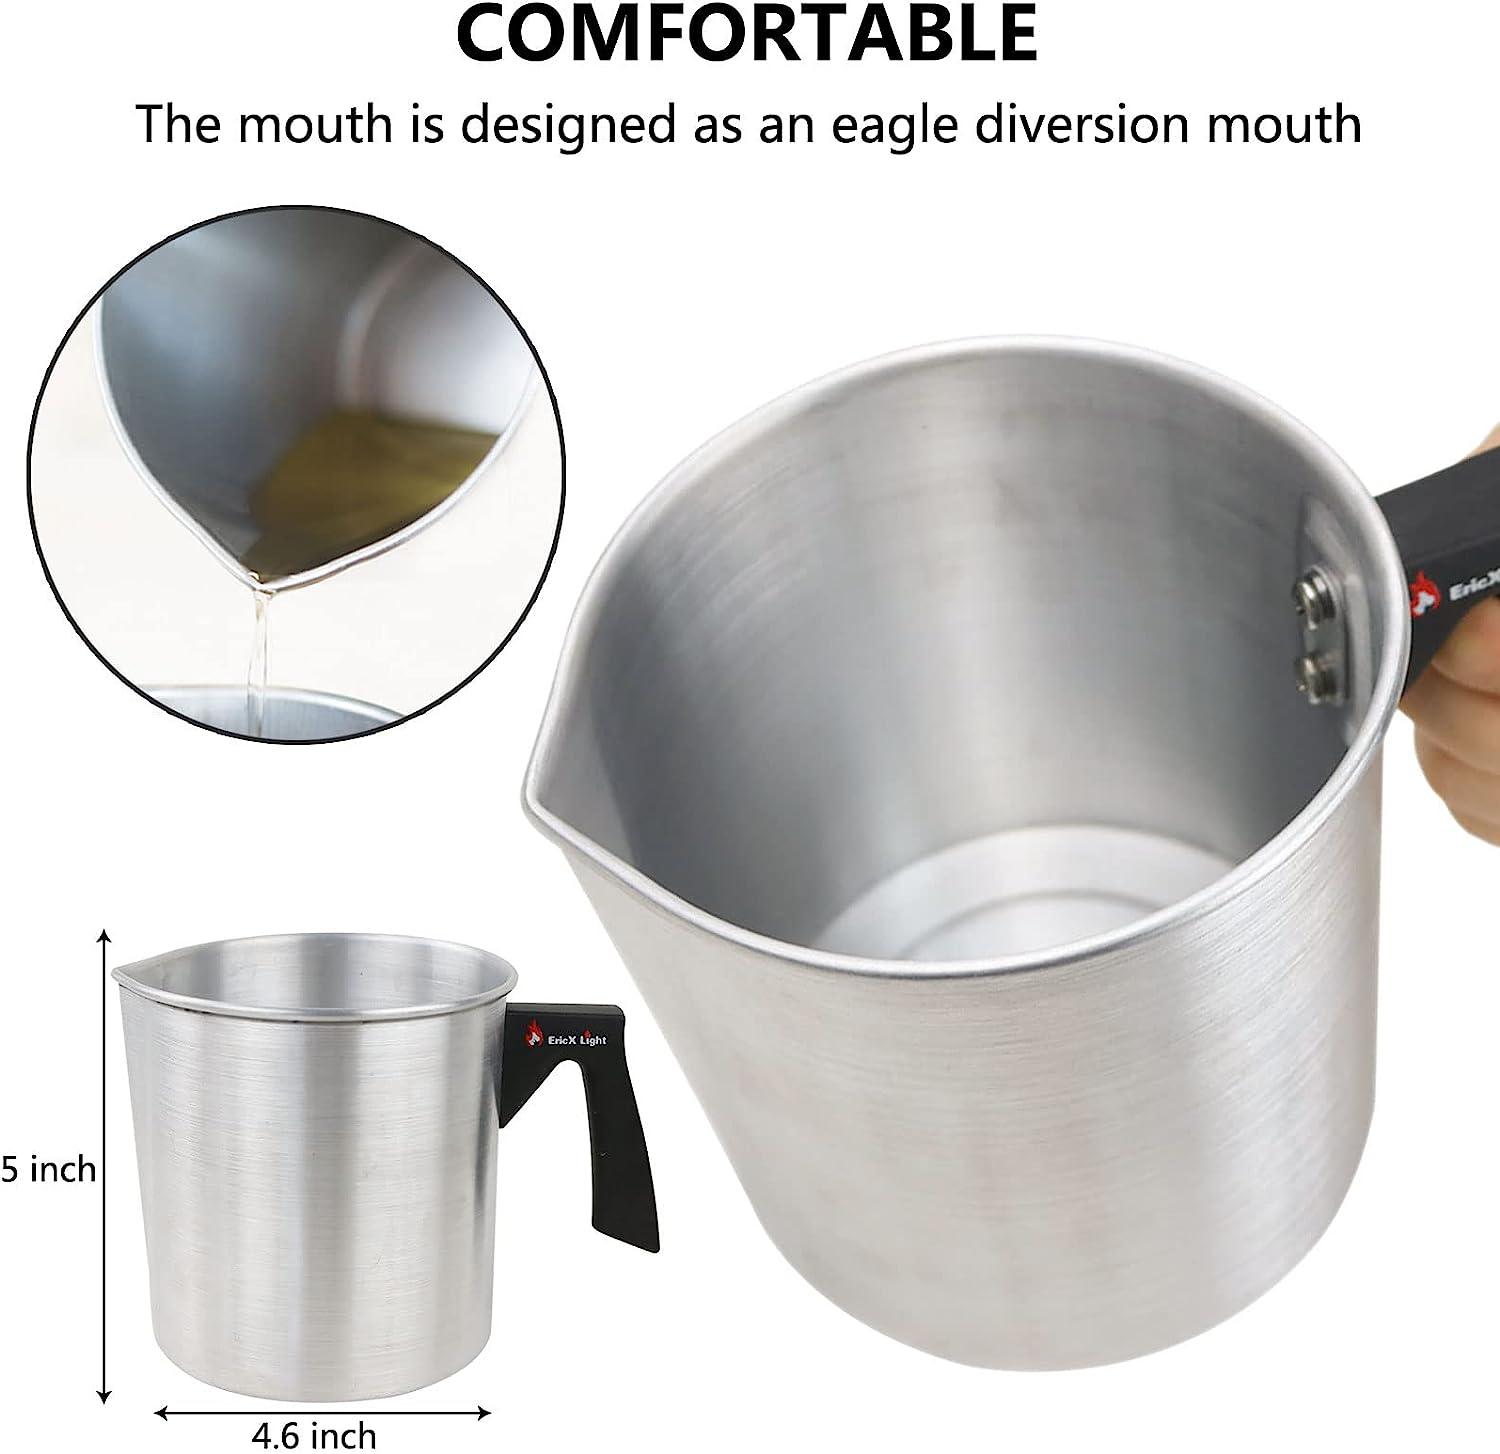 Candle Making Pouring Pot Stainless Steel Wax Melting Measuring